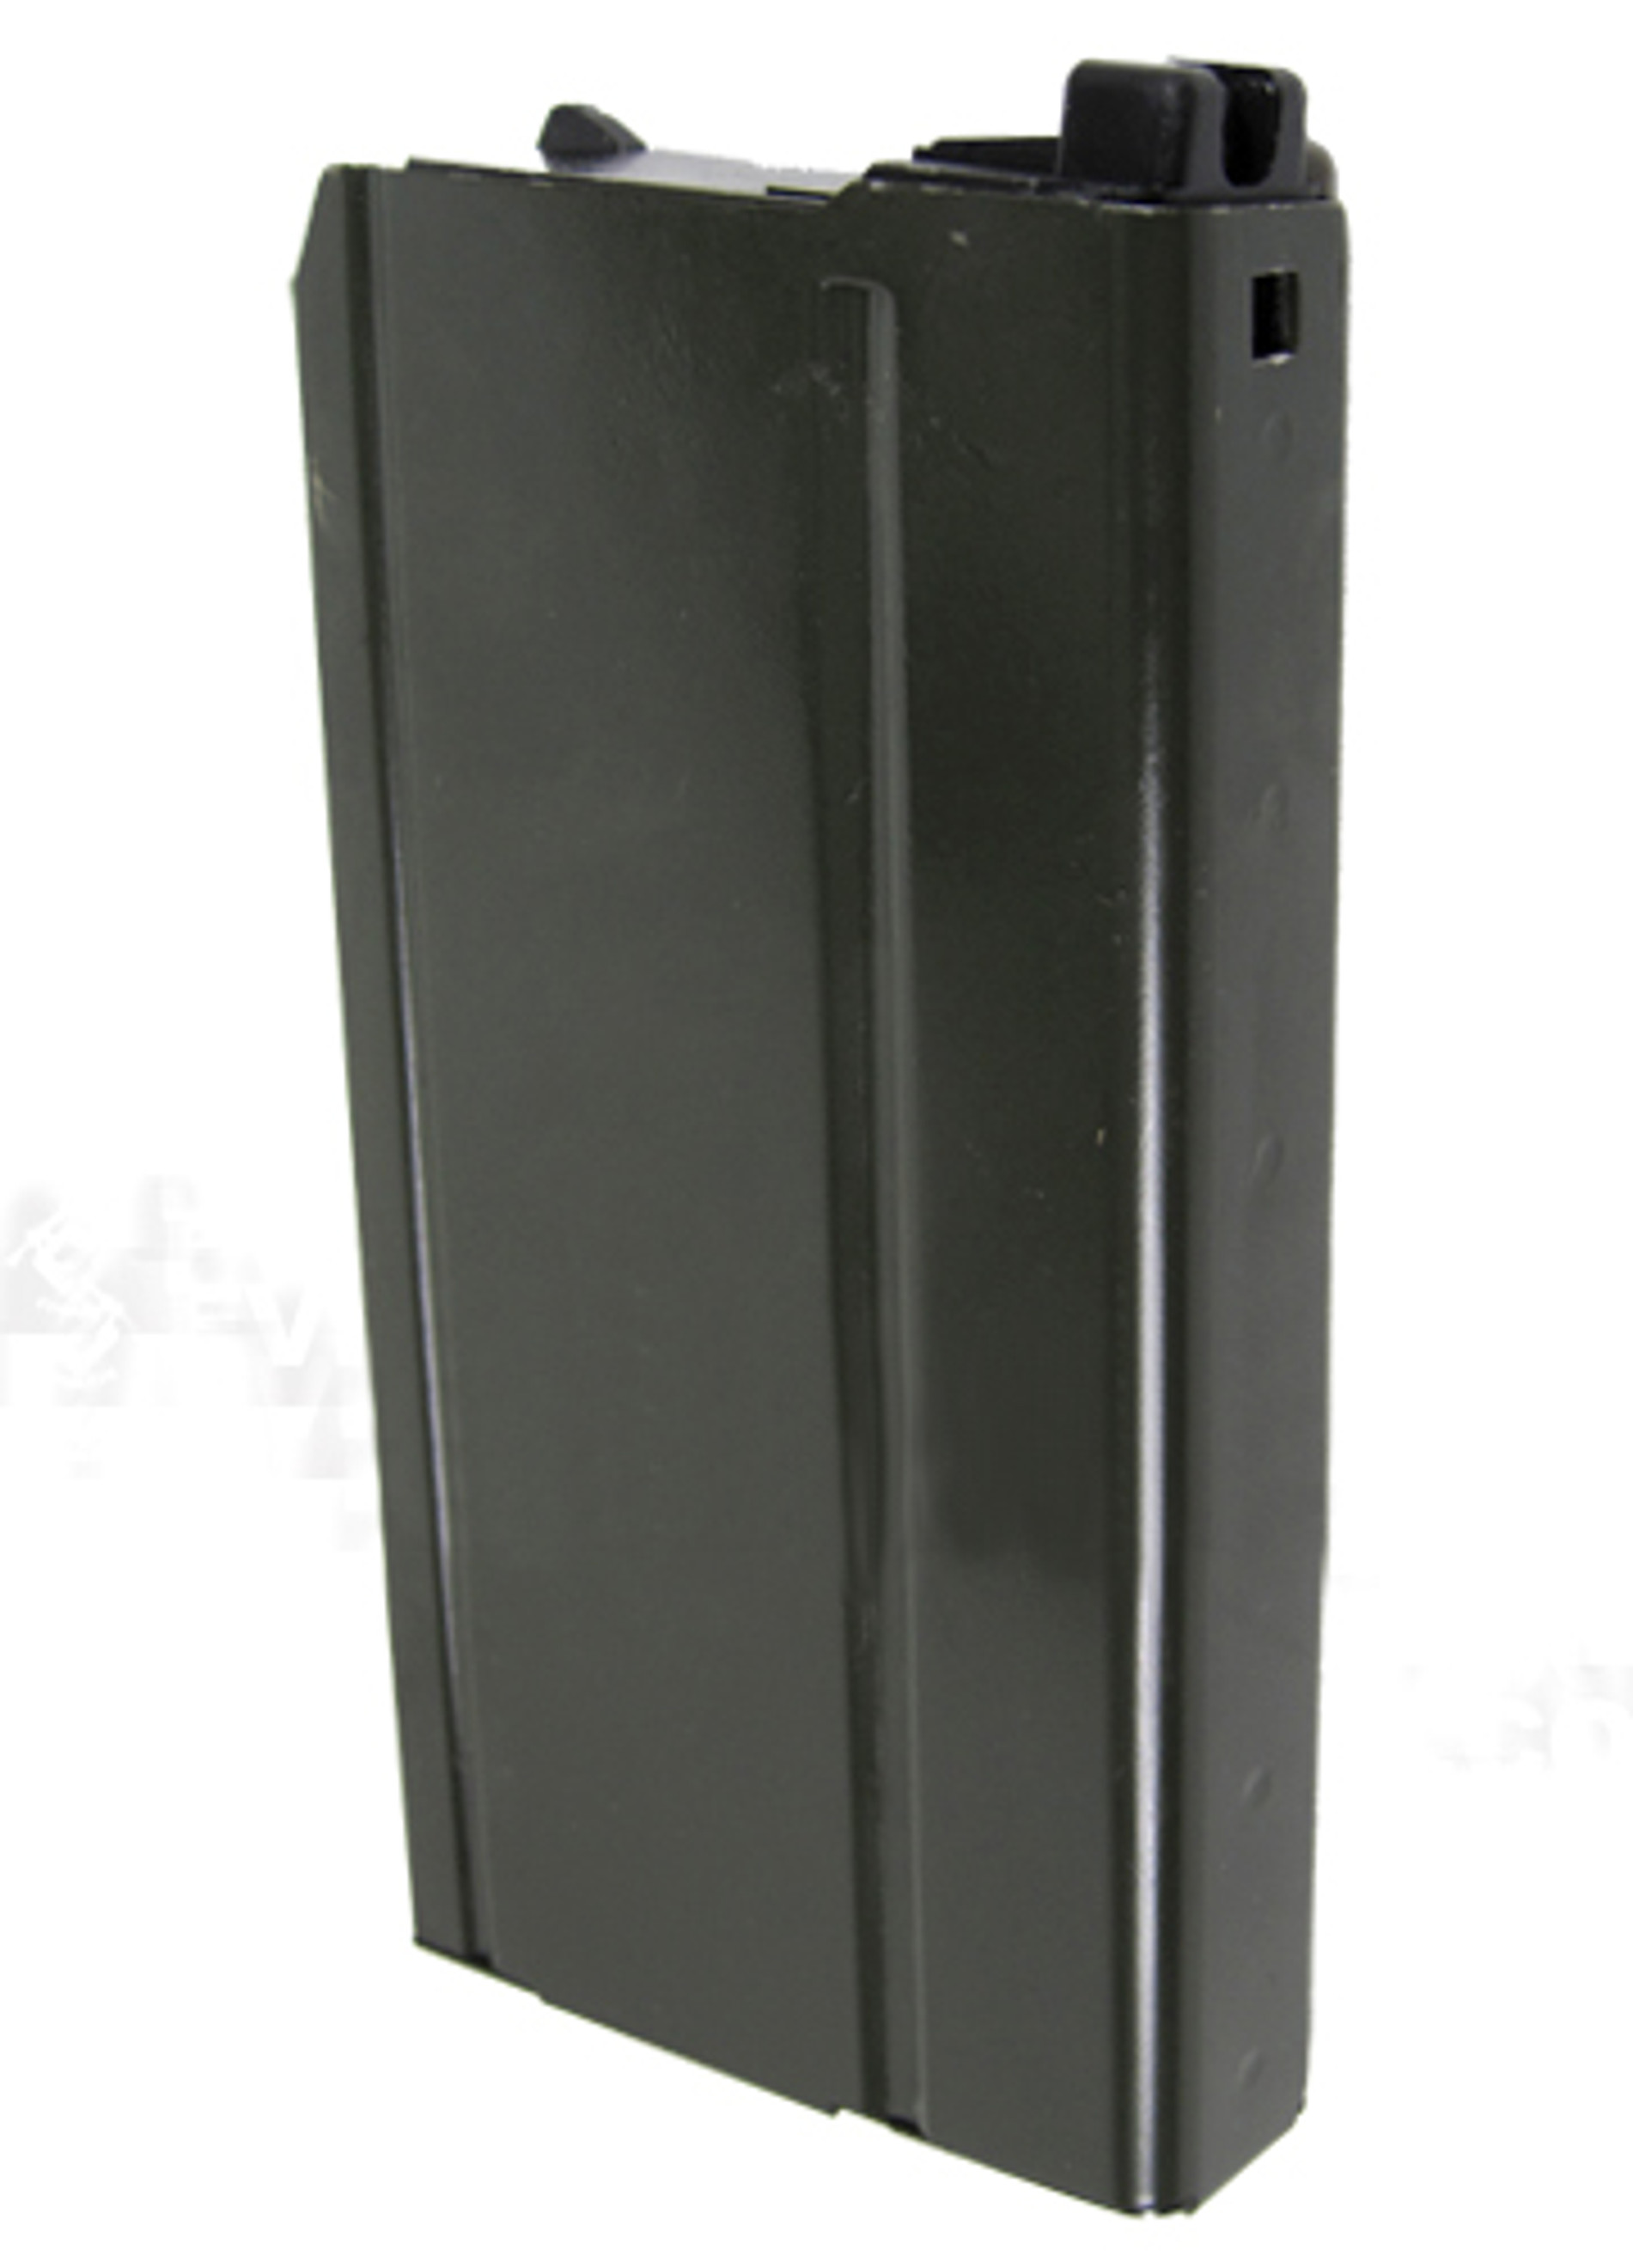 Spare Magazine for Full Metal WE M14 Gas Blowback Rifle. (Green Gas)